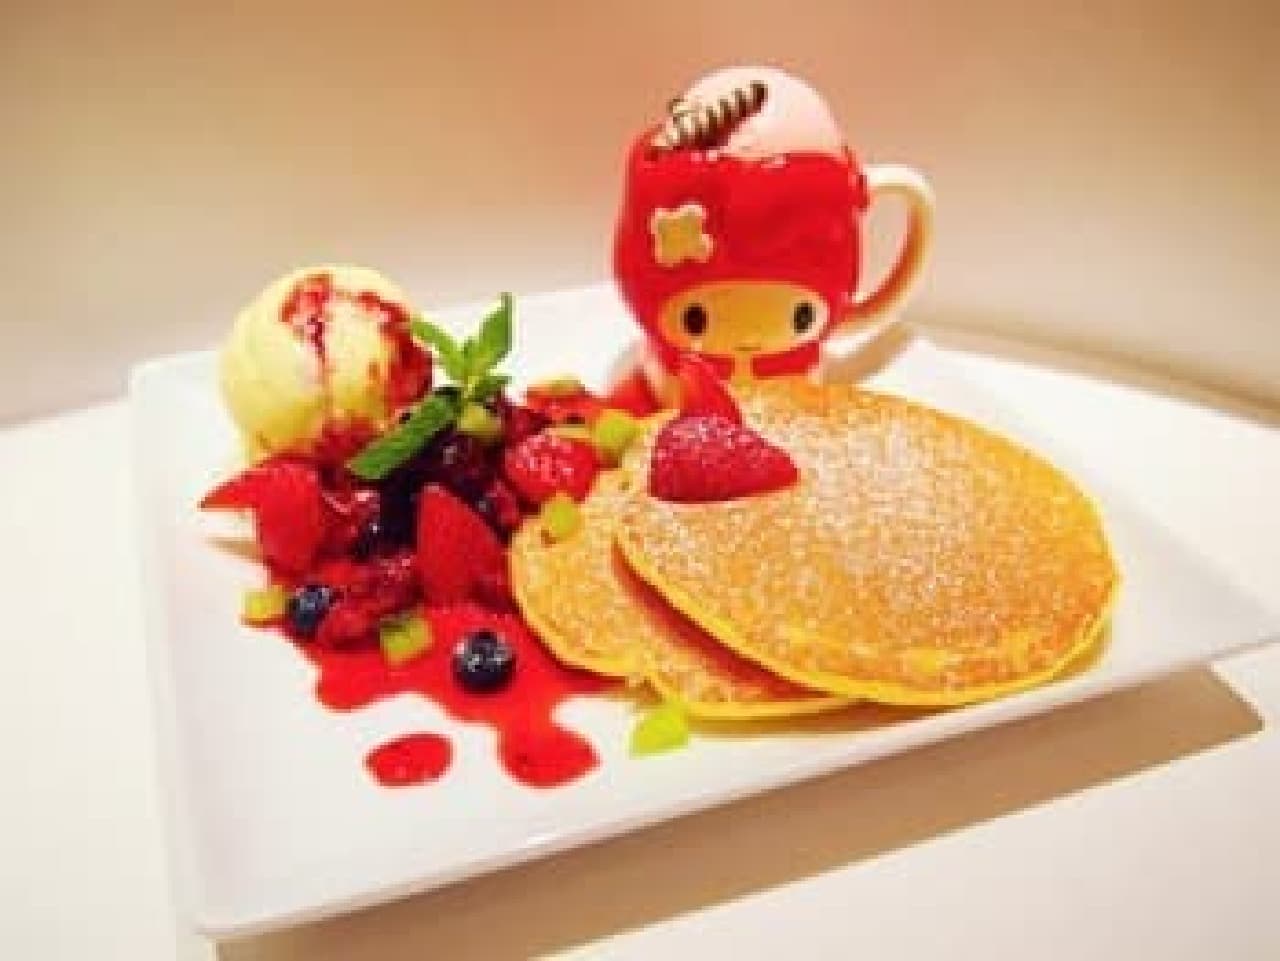 Cute pancakes with My Melody specifications (c) 1976, 2013 SANRIO CO., LTD.